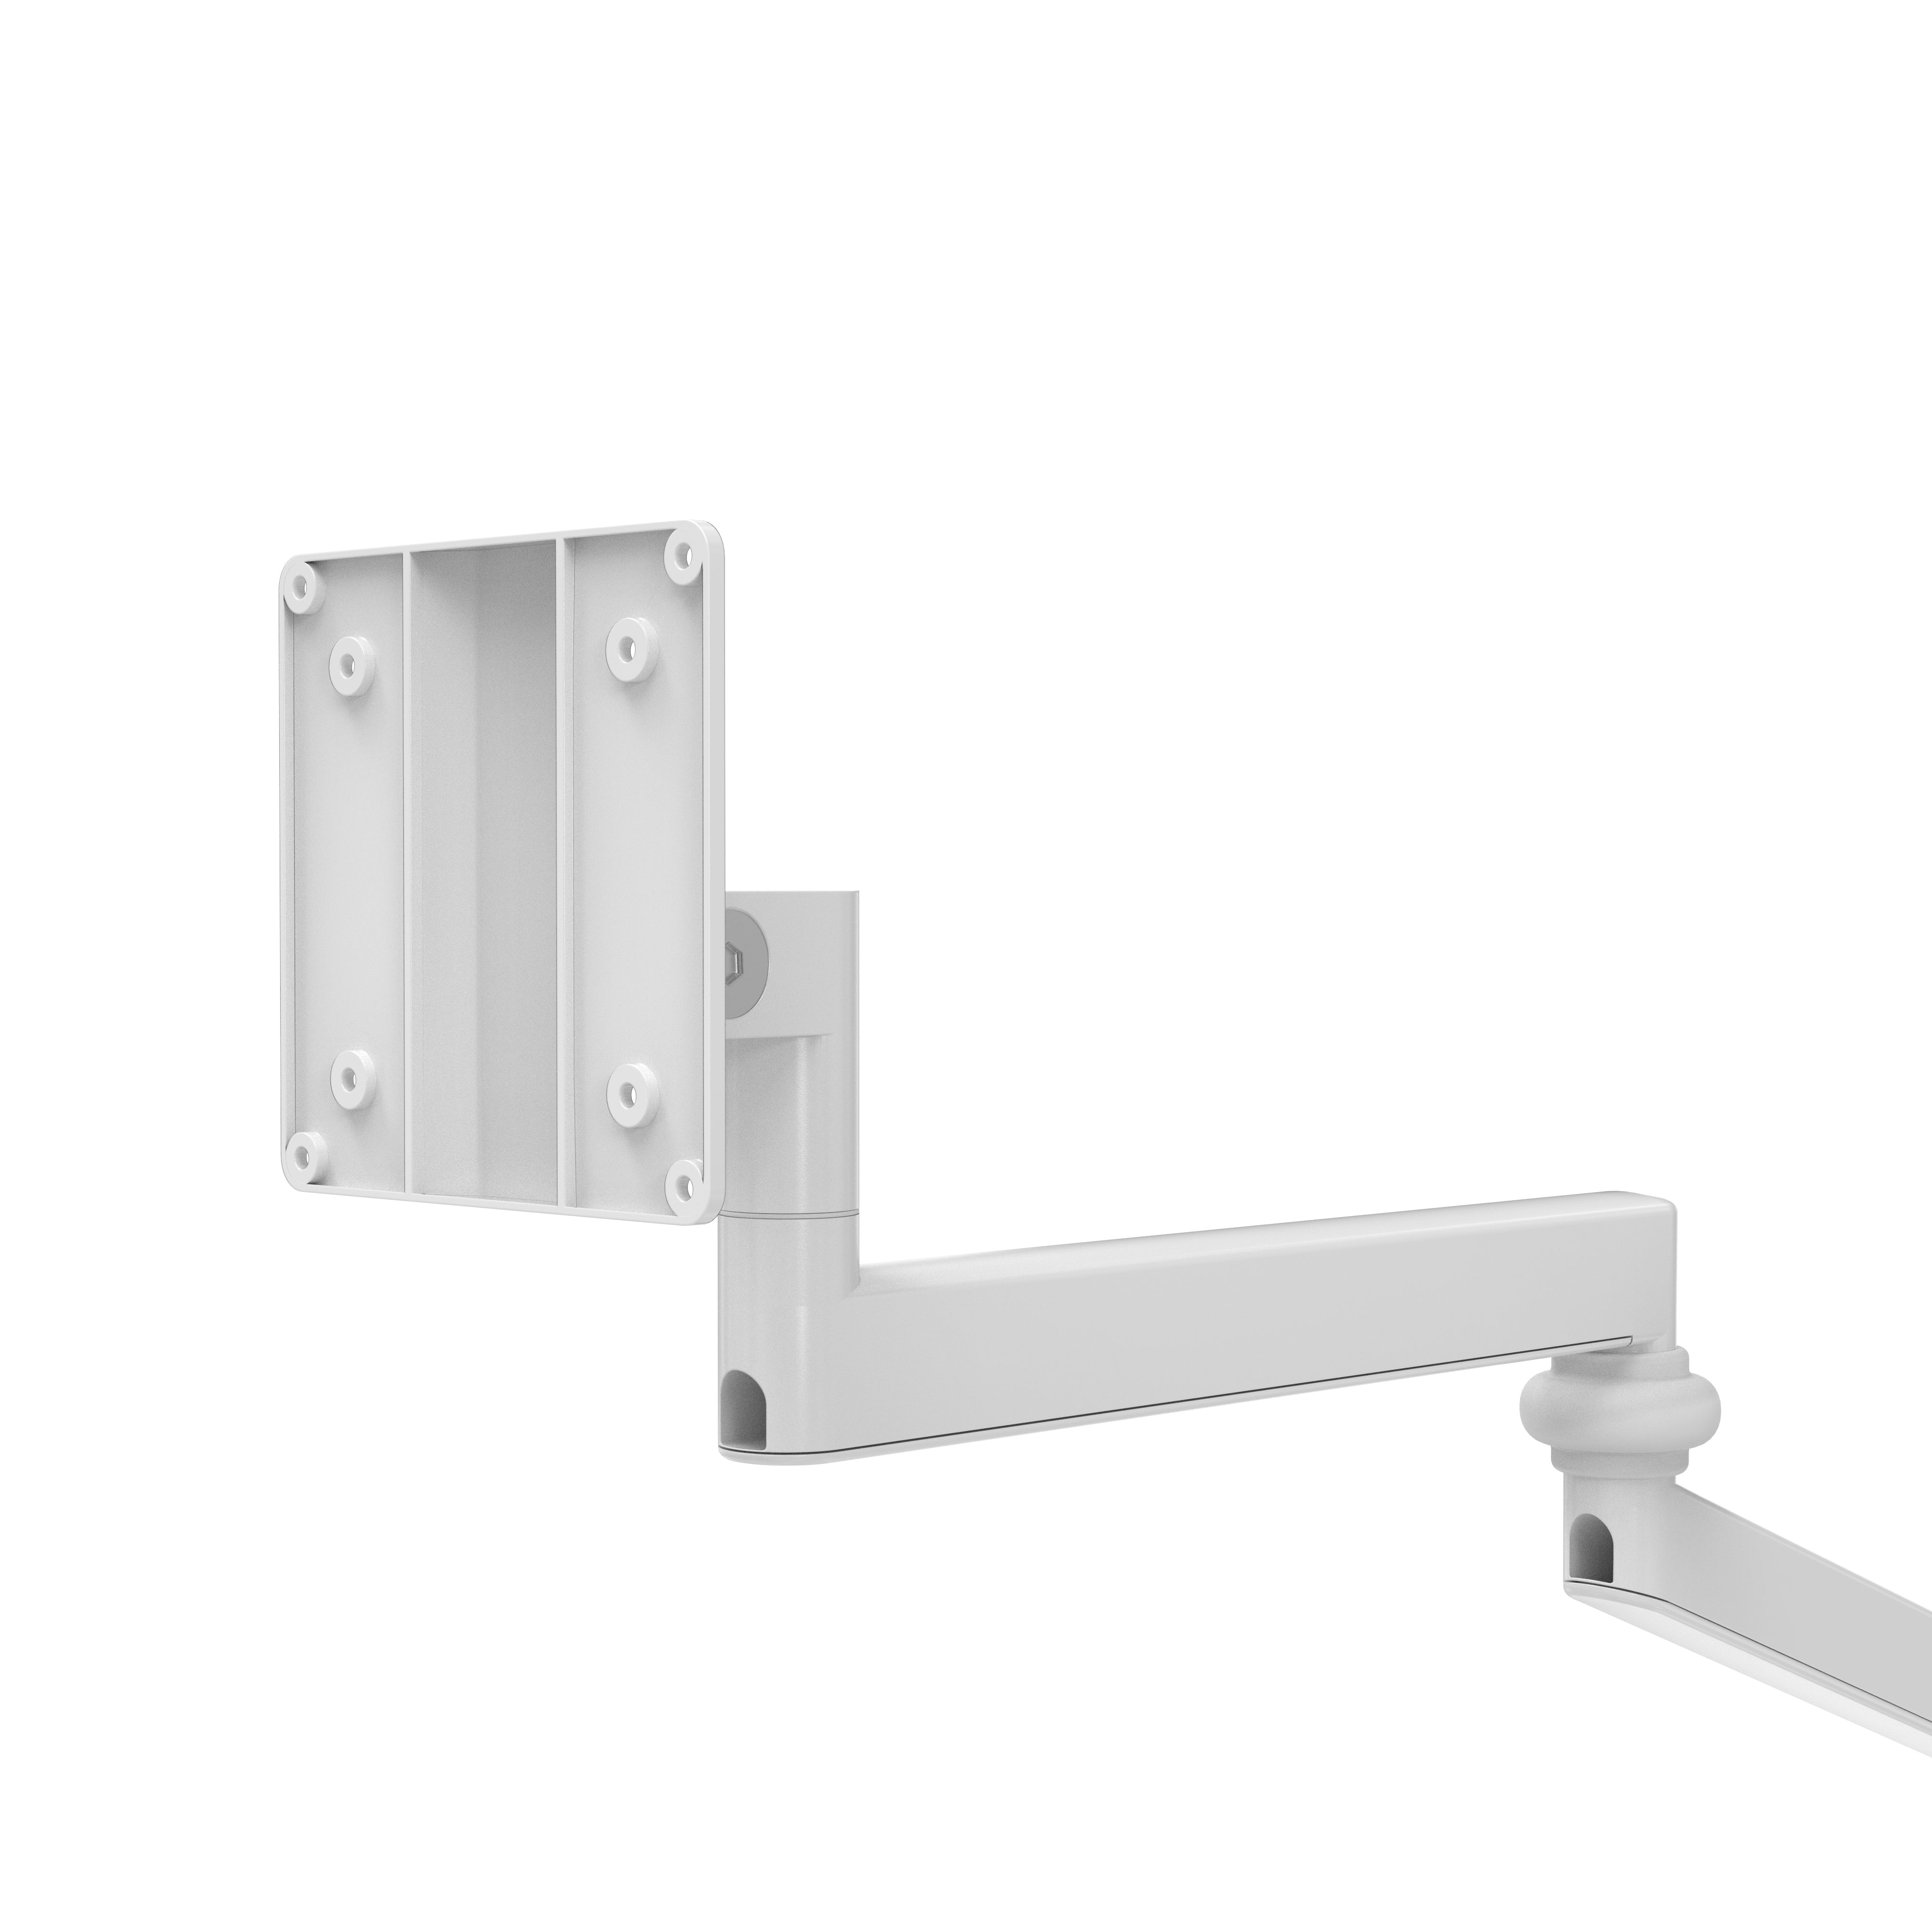 Medical Arm Wall Mount w/ Universal Security Enclosure for iPad Gen 7,8,9 & more